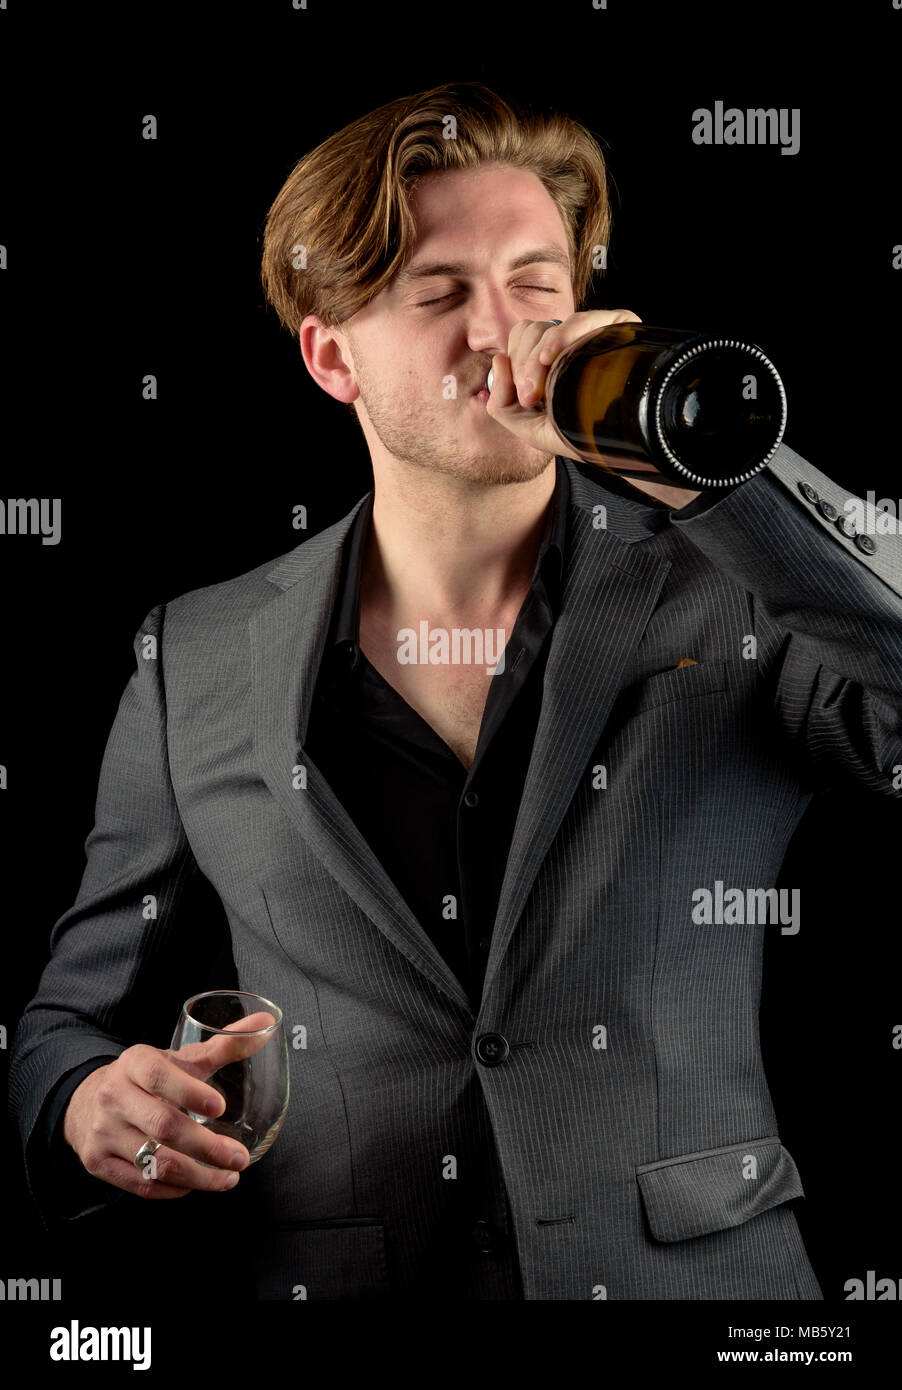 Caucasian male model in a charcoal suit with a bottle of red wine and a fresh cigar. Model isoalted againt a black background Stock Photo